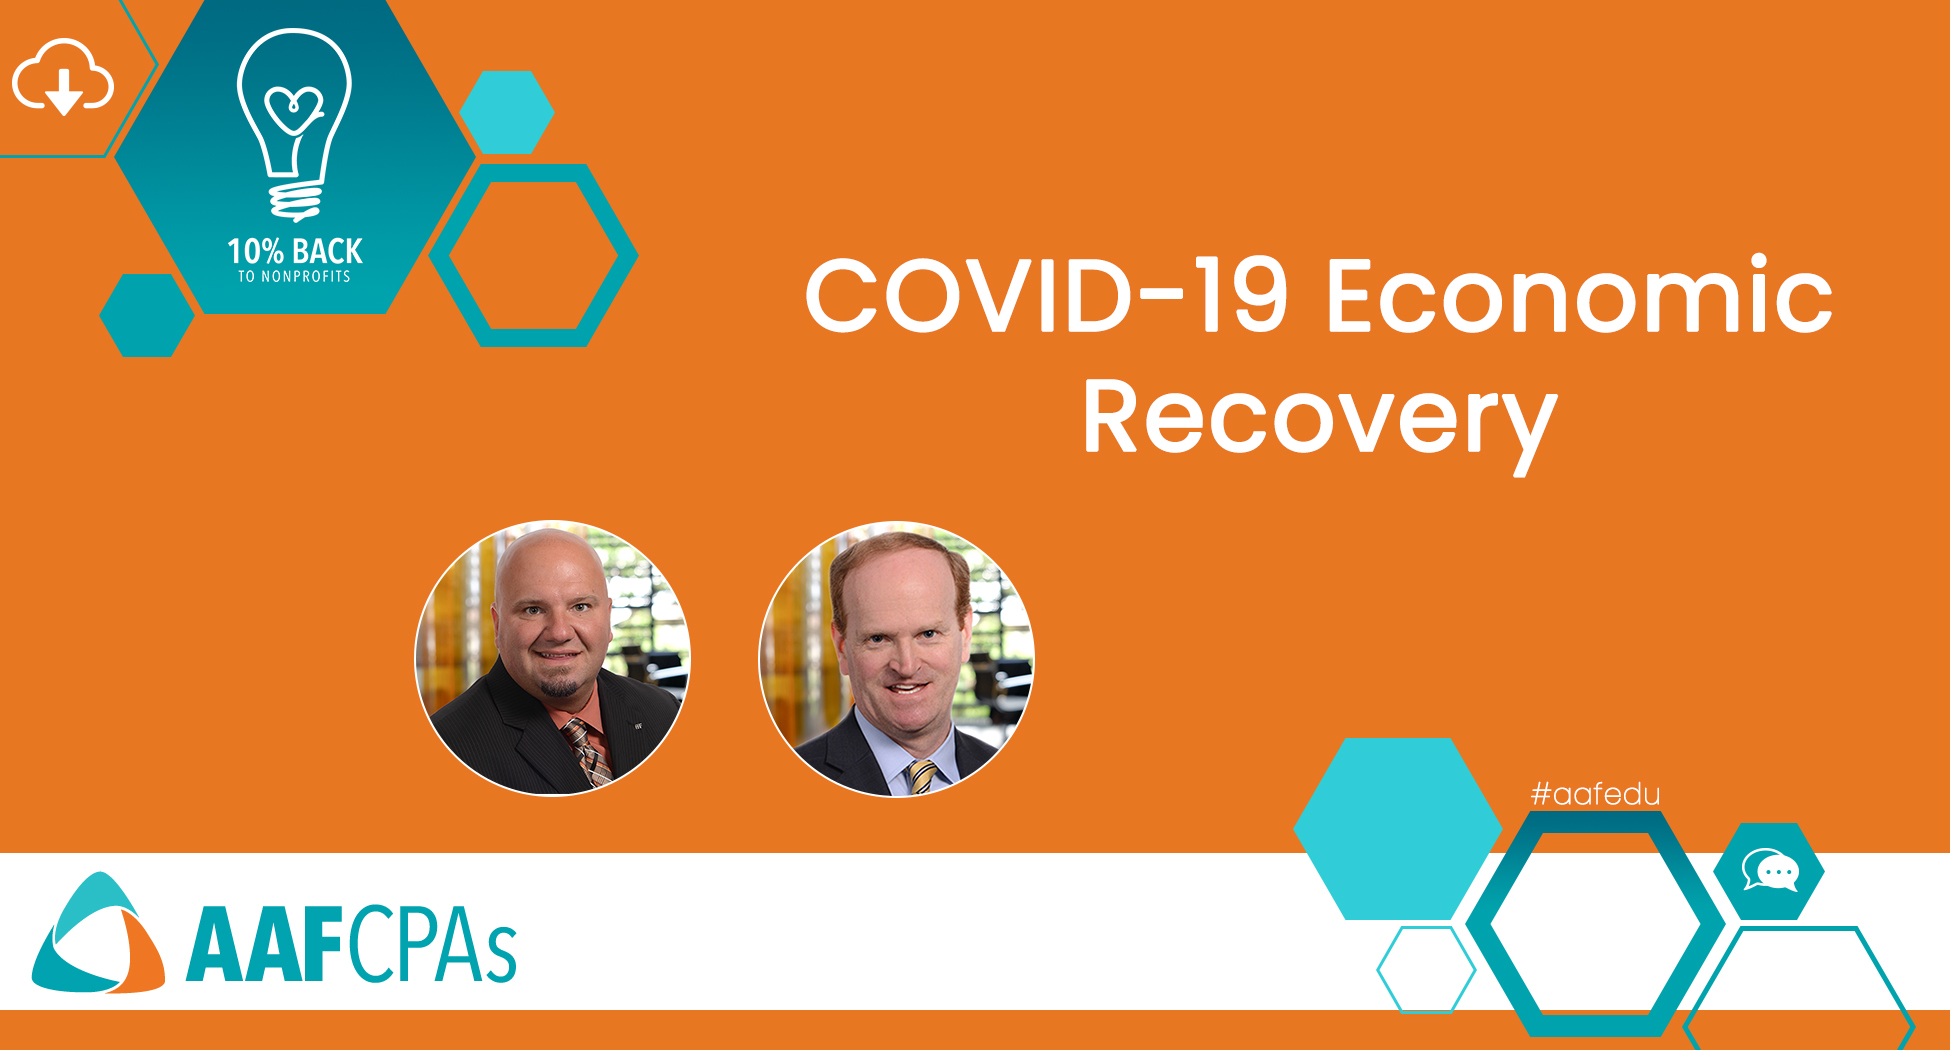 COVID-19 Economic Recovery: Where Do We Go From Here?